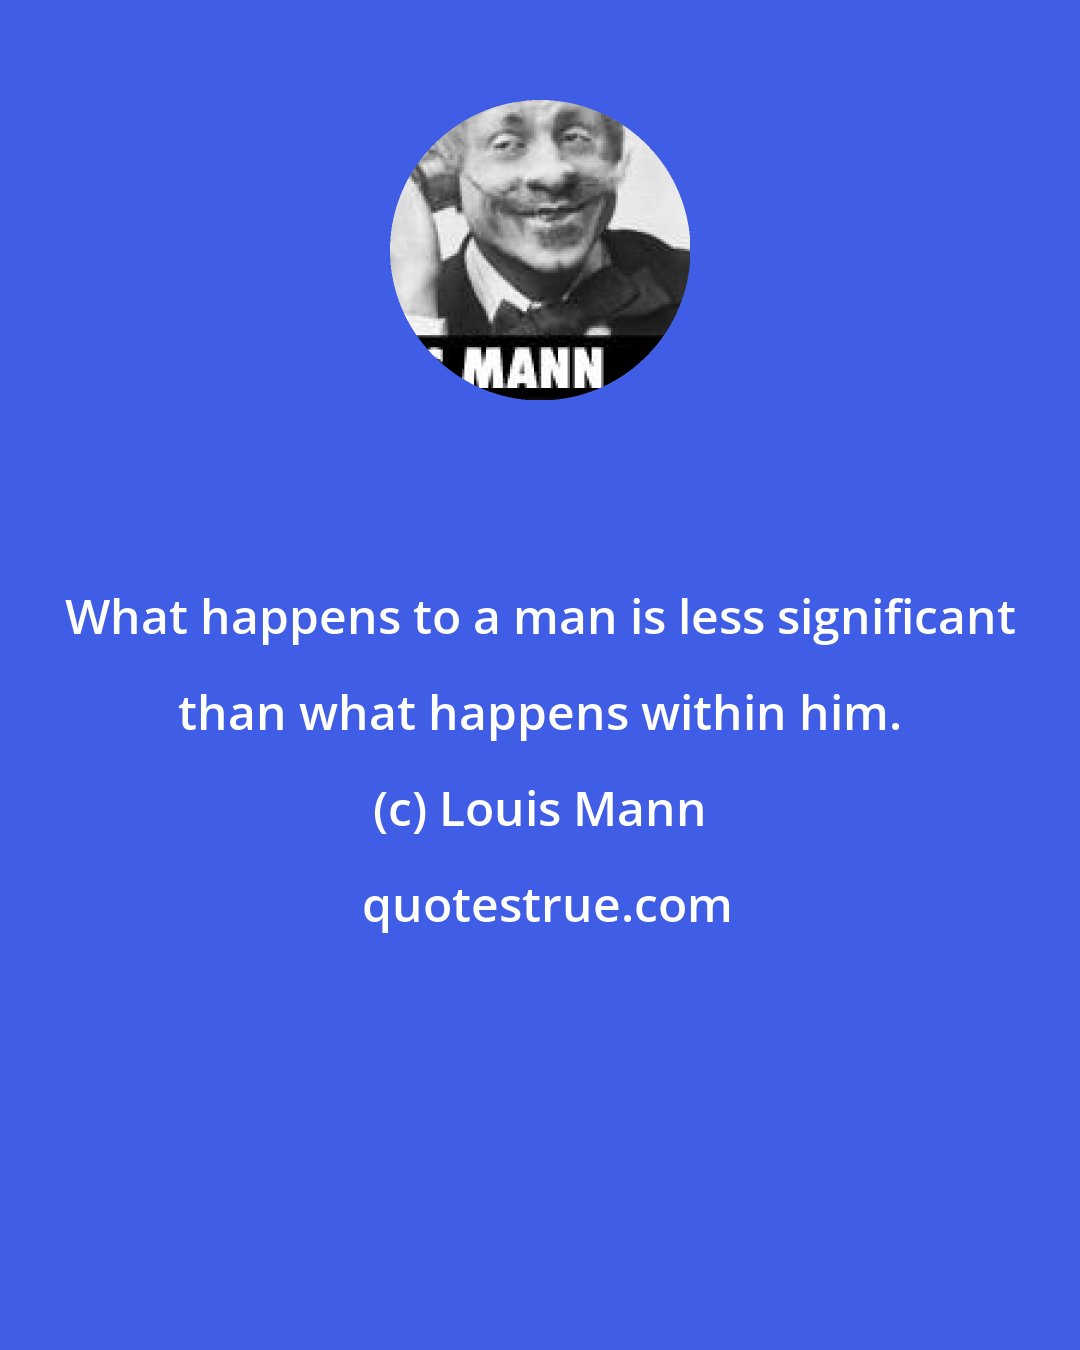 Louis Mann: What happens to a man is less significant than what happens within him.